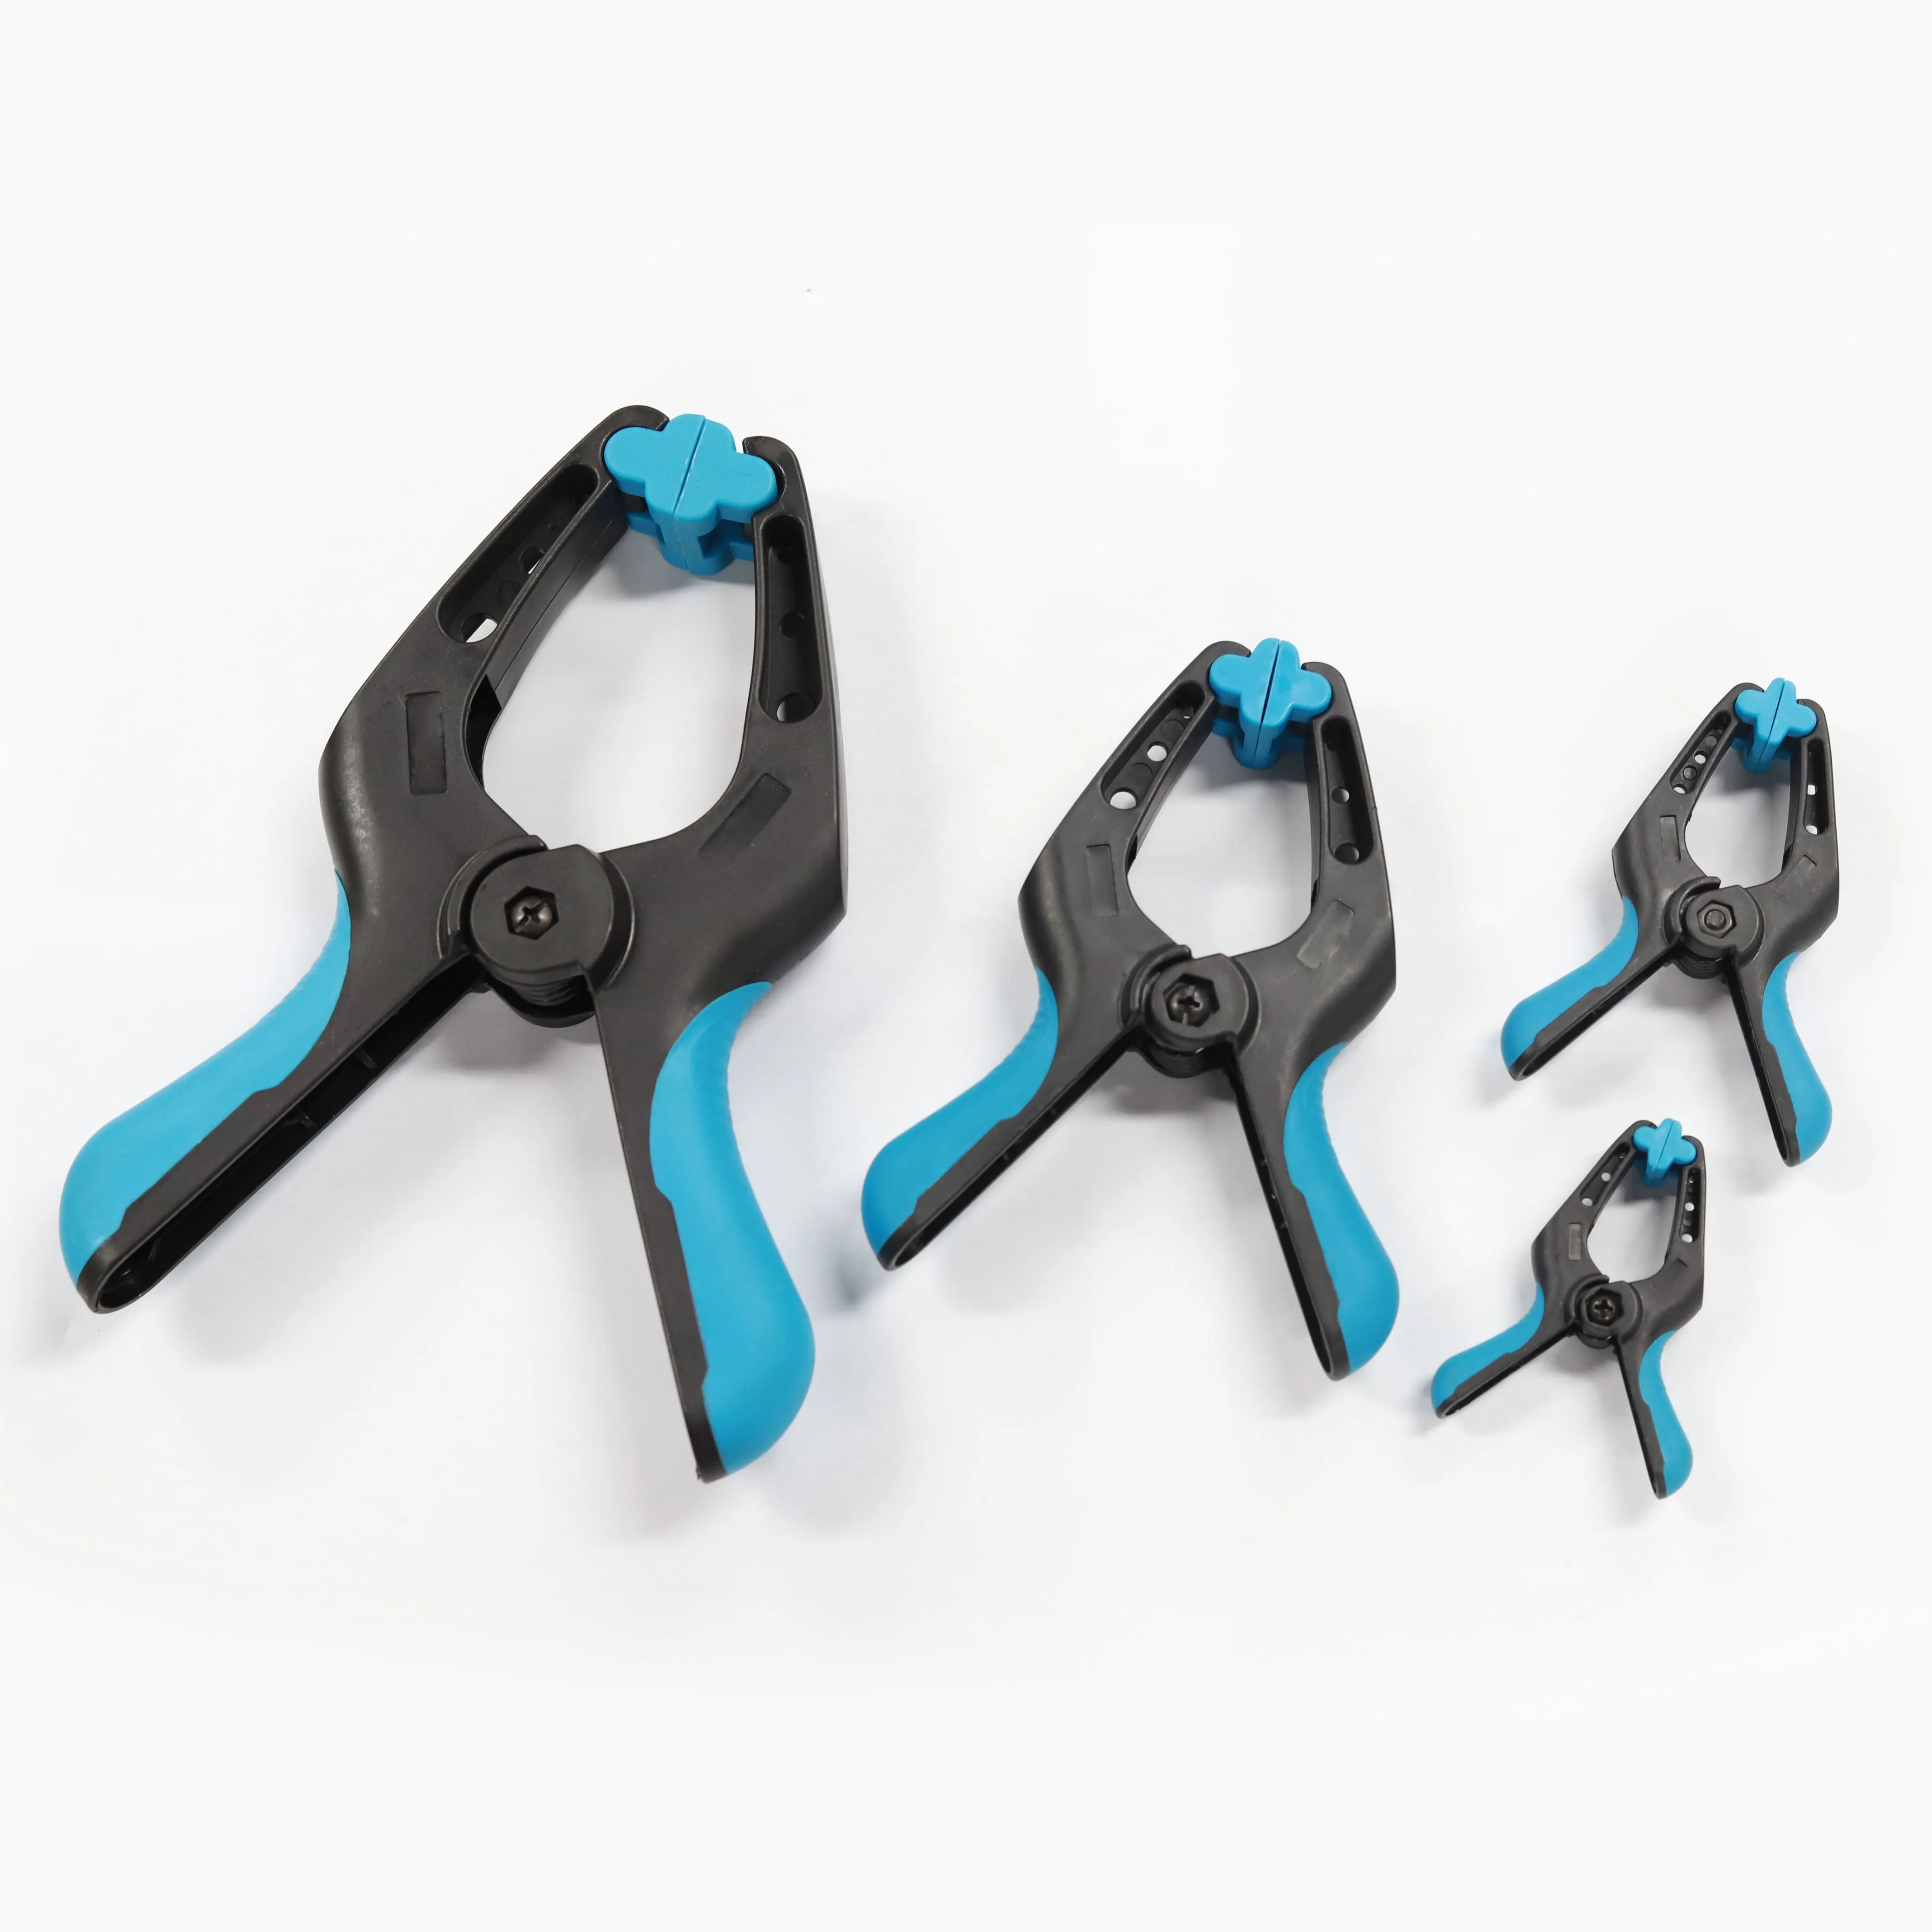 Spring Clamps Woodworking Tools Plastic Clamps a Shape Spring Clamp Hanger Card/plastic Bag